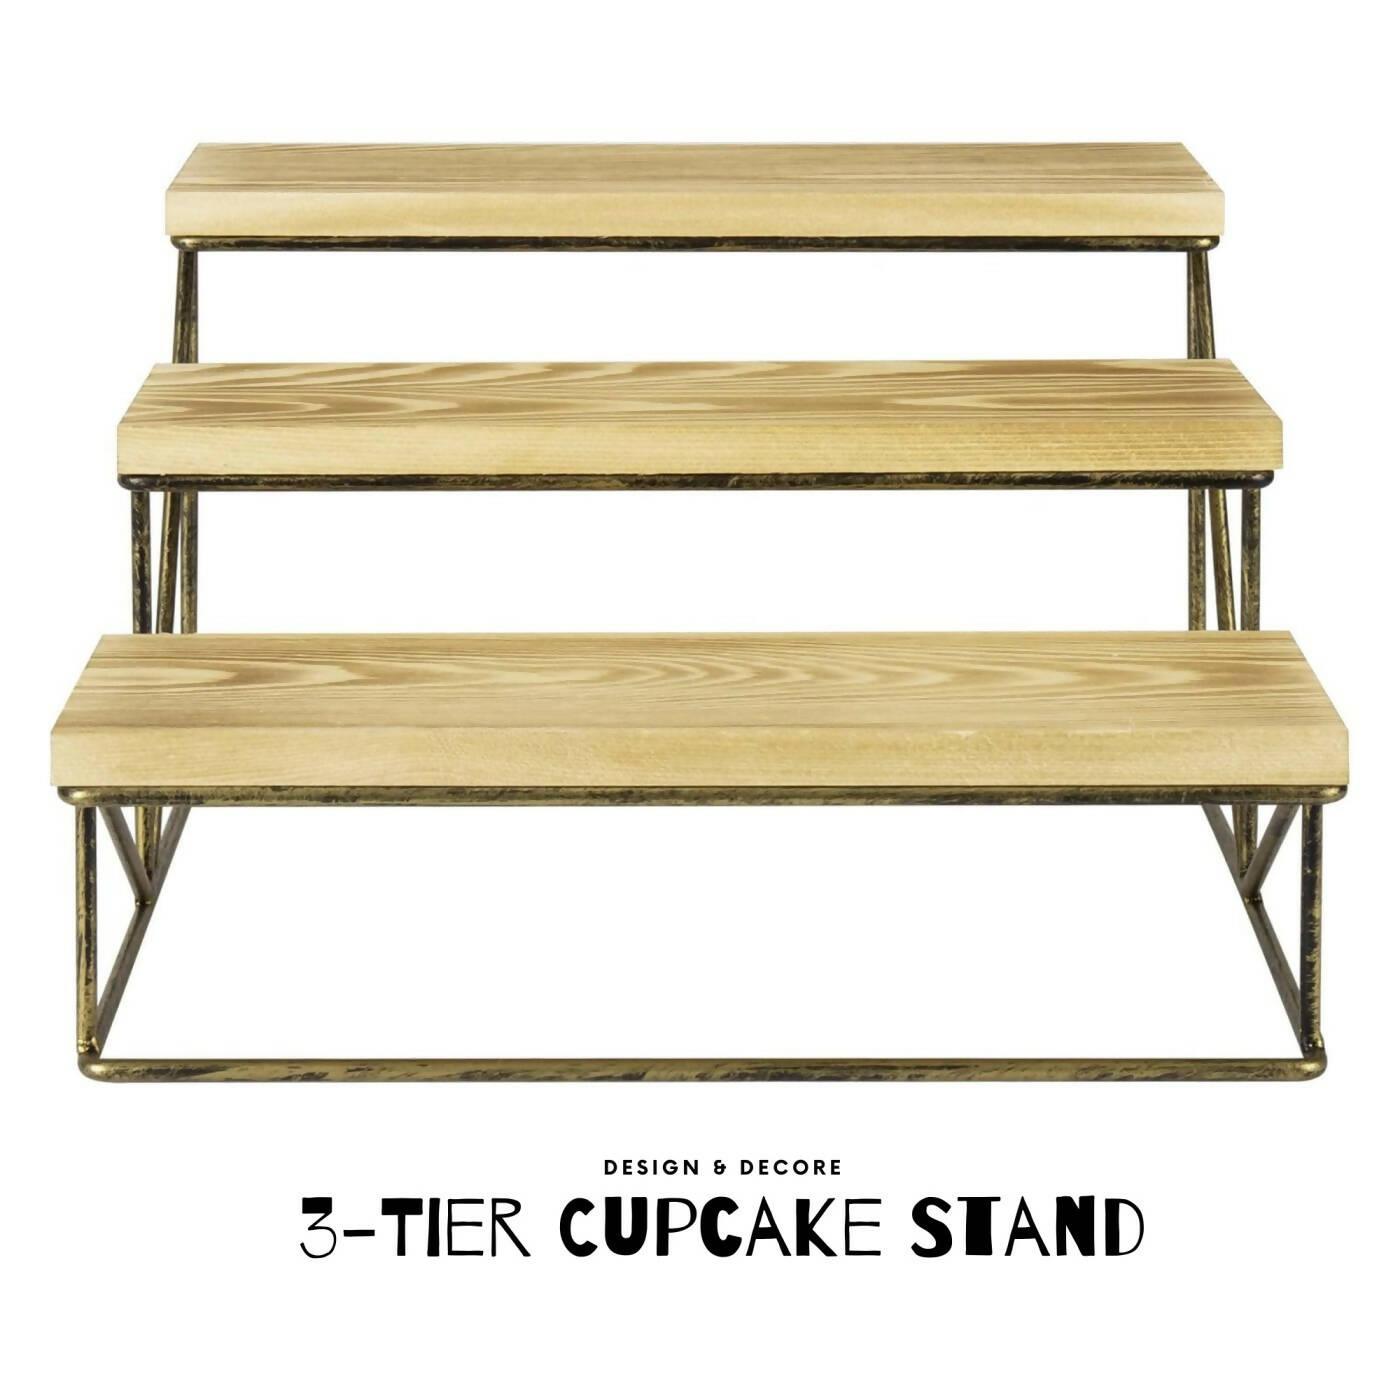 3-Tier Cupcake Stand, Countertop Dessert and Appetizer Riser Display Stand With Brown Wood and Metal and Cascading Design - ValueBox